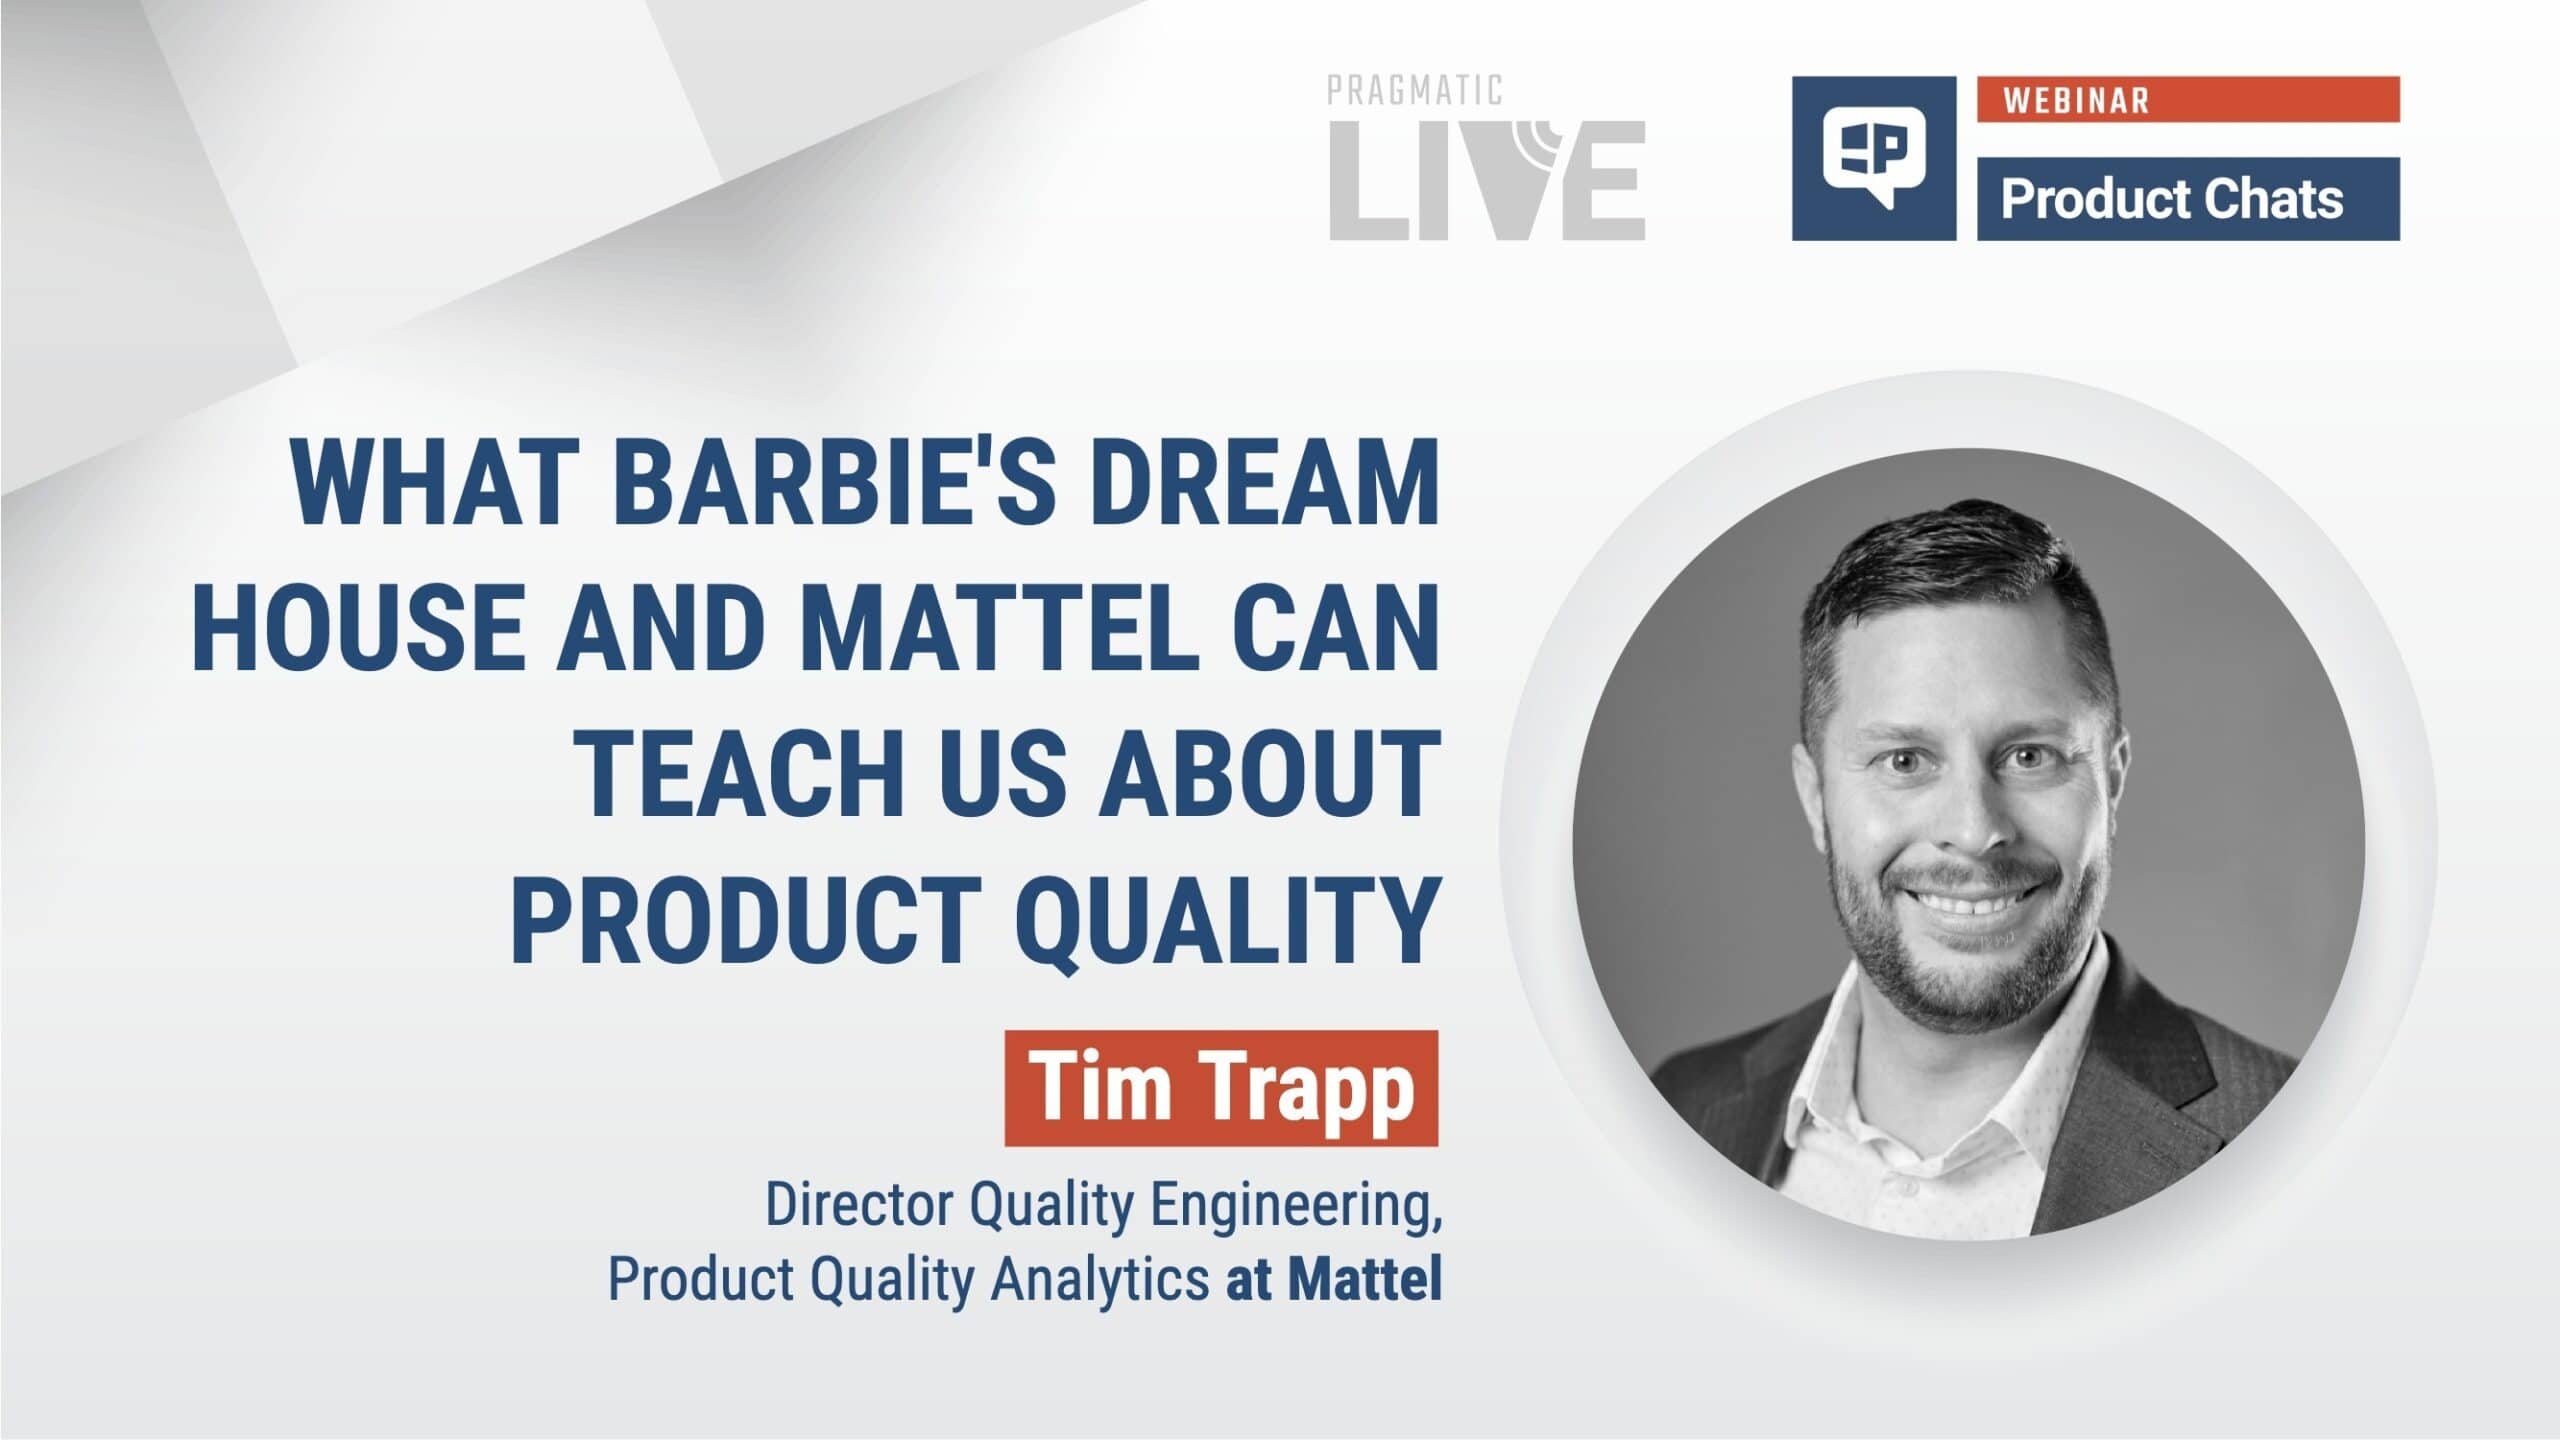 Pragmatic Institute Webinar with Tim Trapp: What Barbie’s Dream House and Mattel Can Teach Us About Product Quality